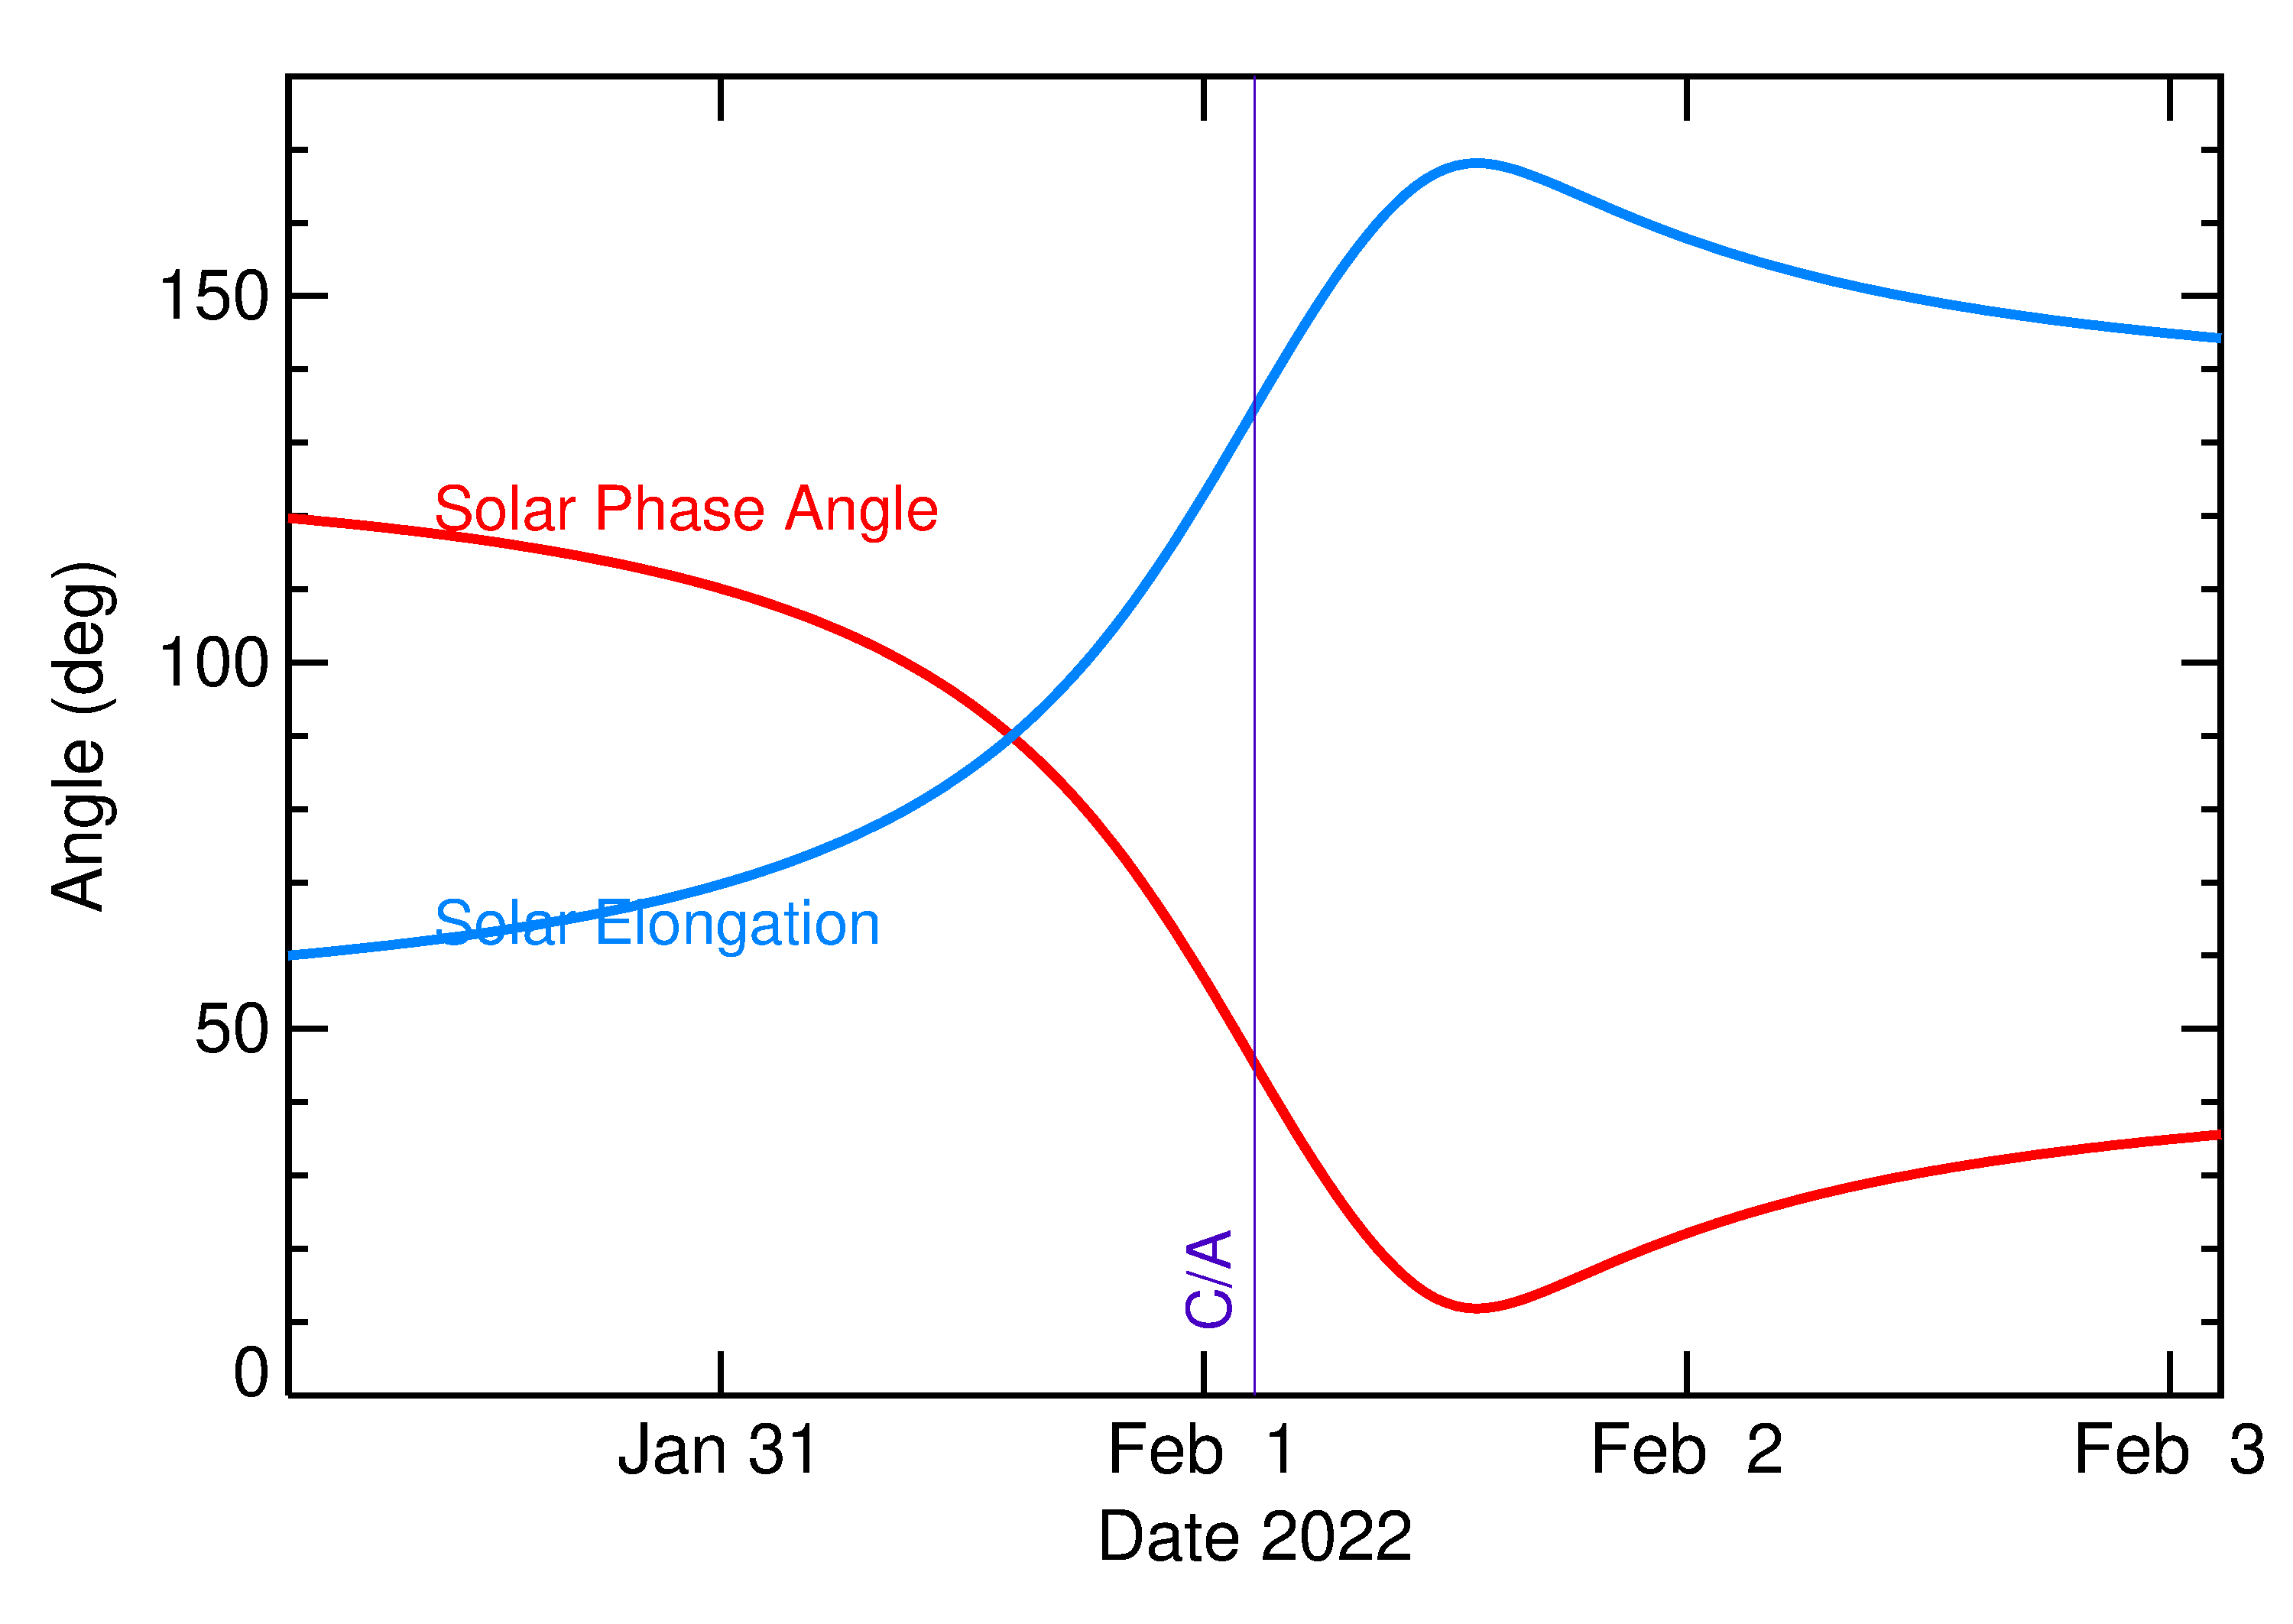 Solar Elongation and Solar Phase Angle of 2022 CE in the days around closest approach